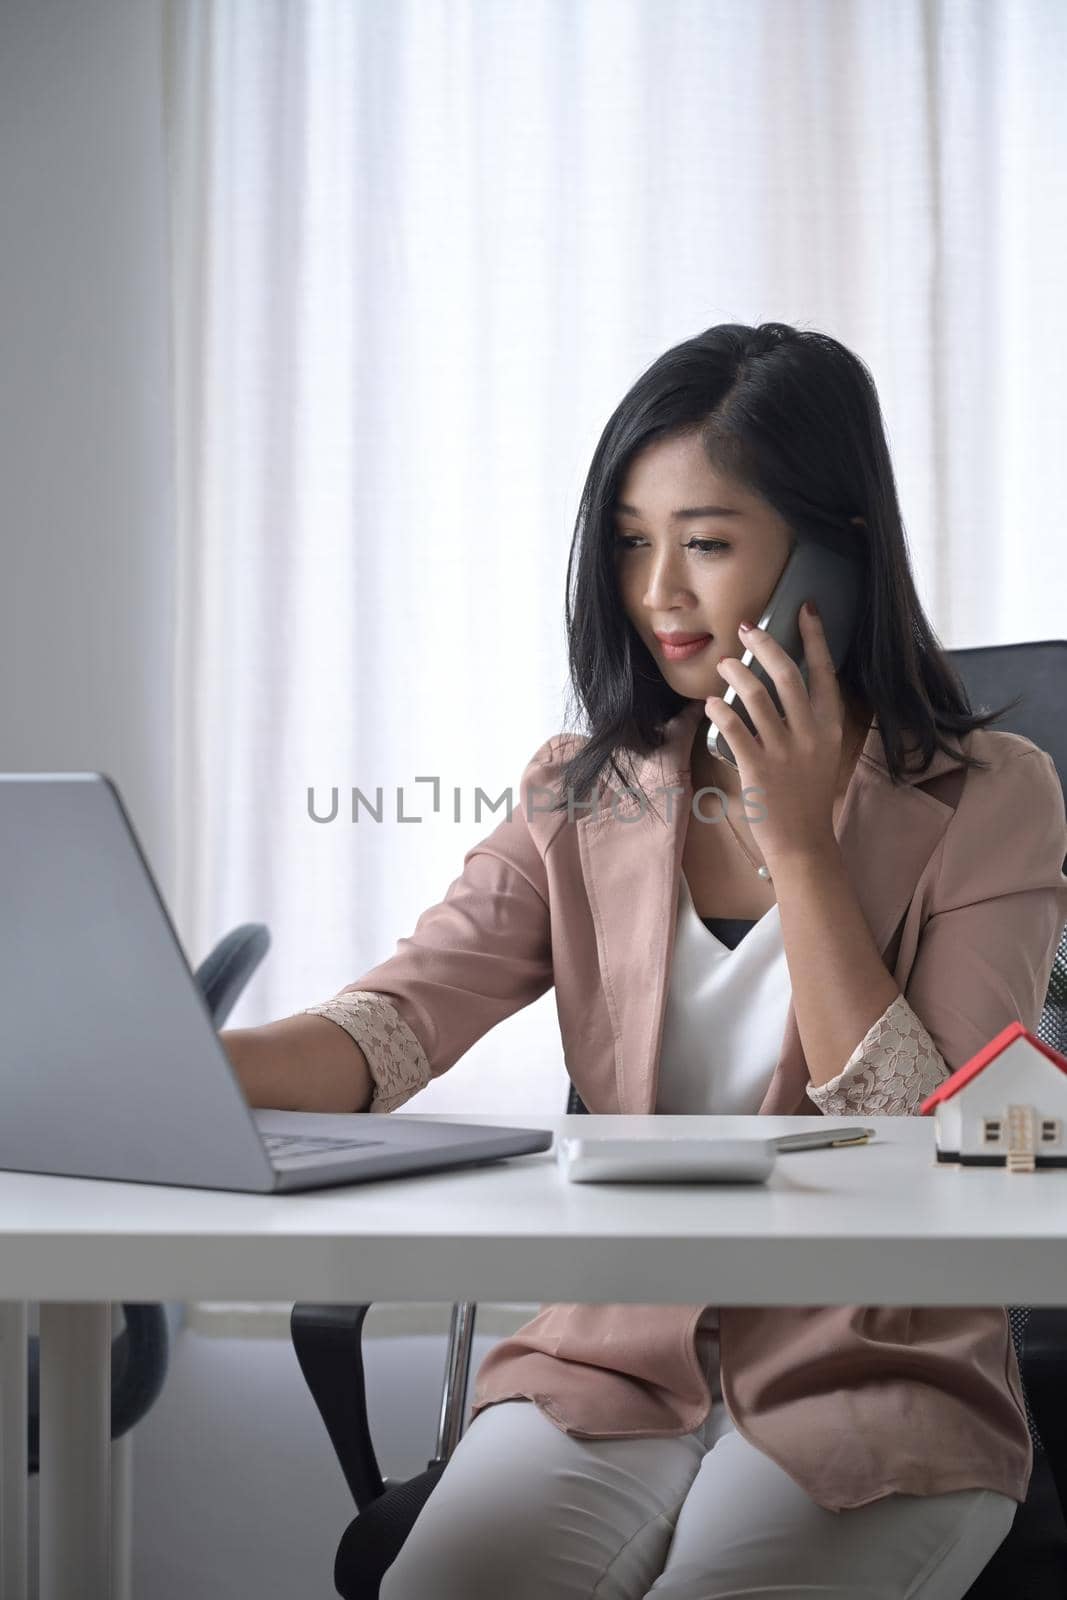 Busy businesswoman using laptop computer and talking on mobile phone.